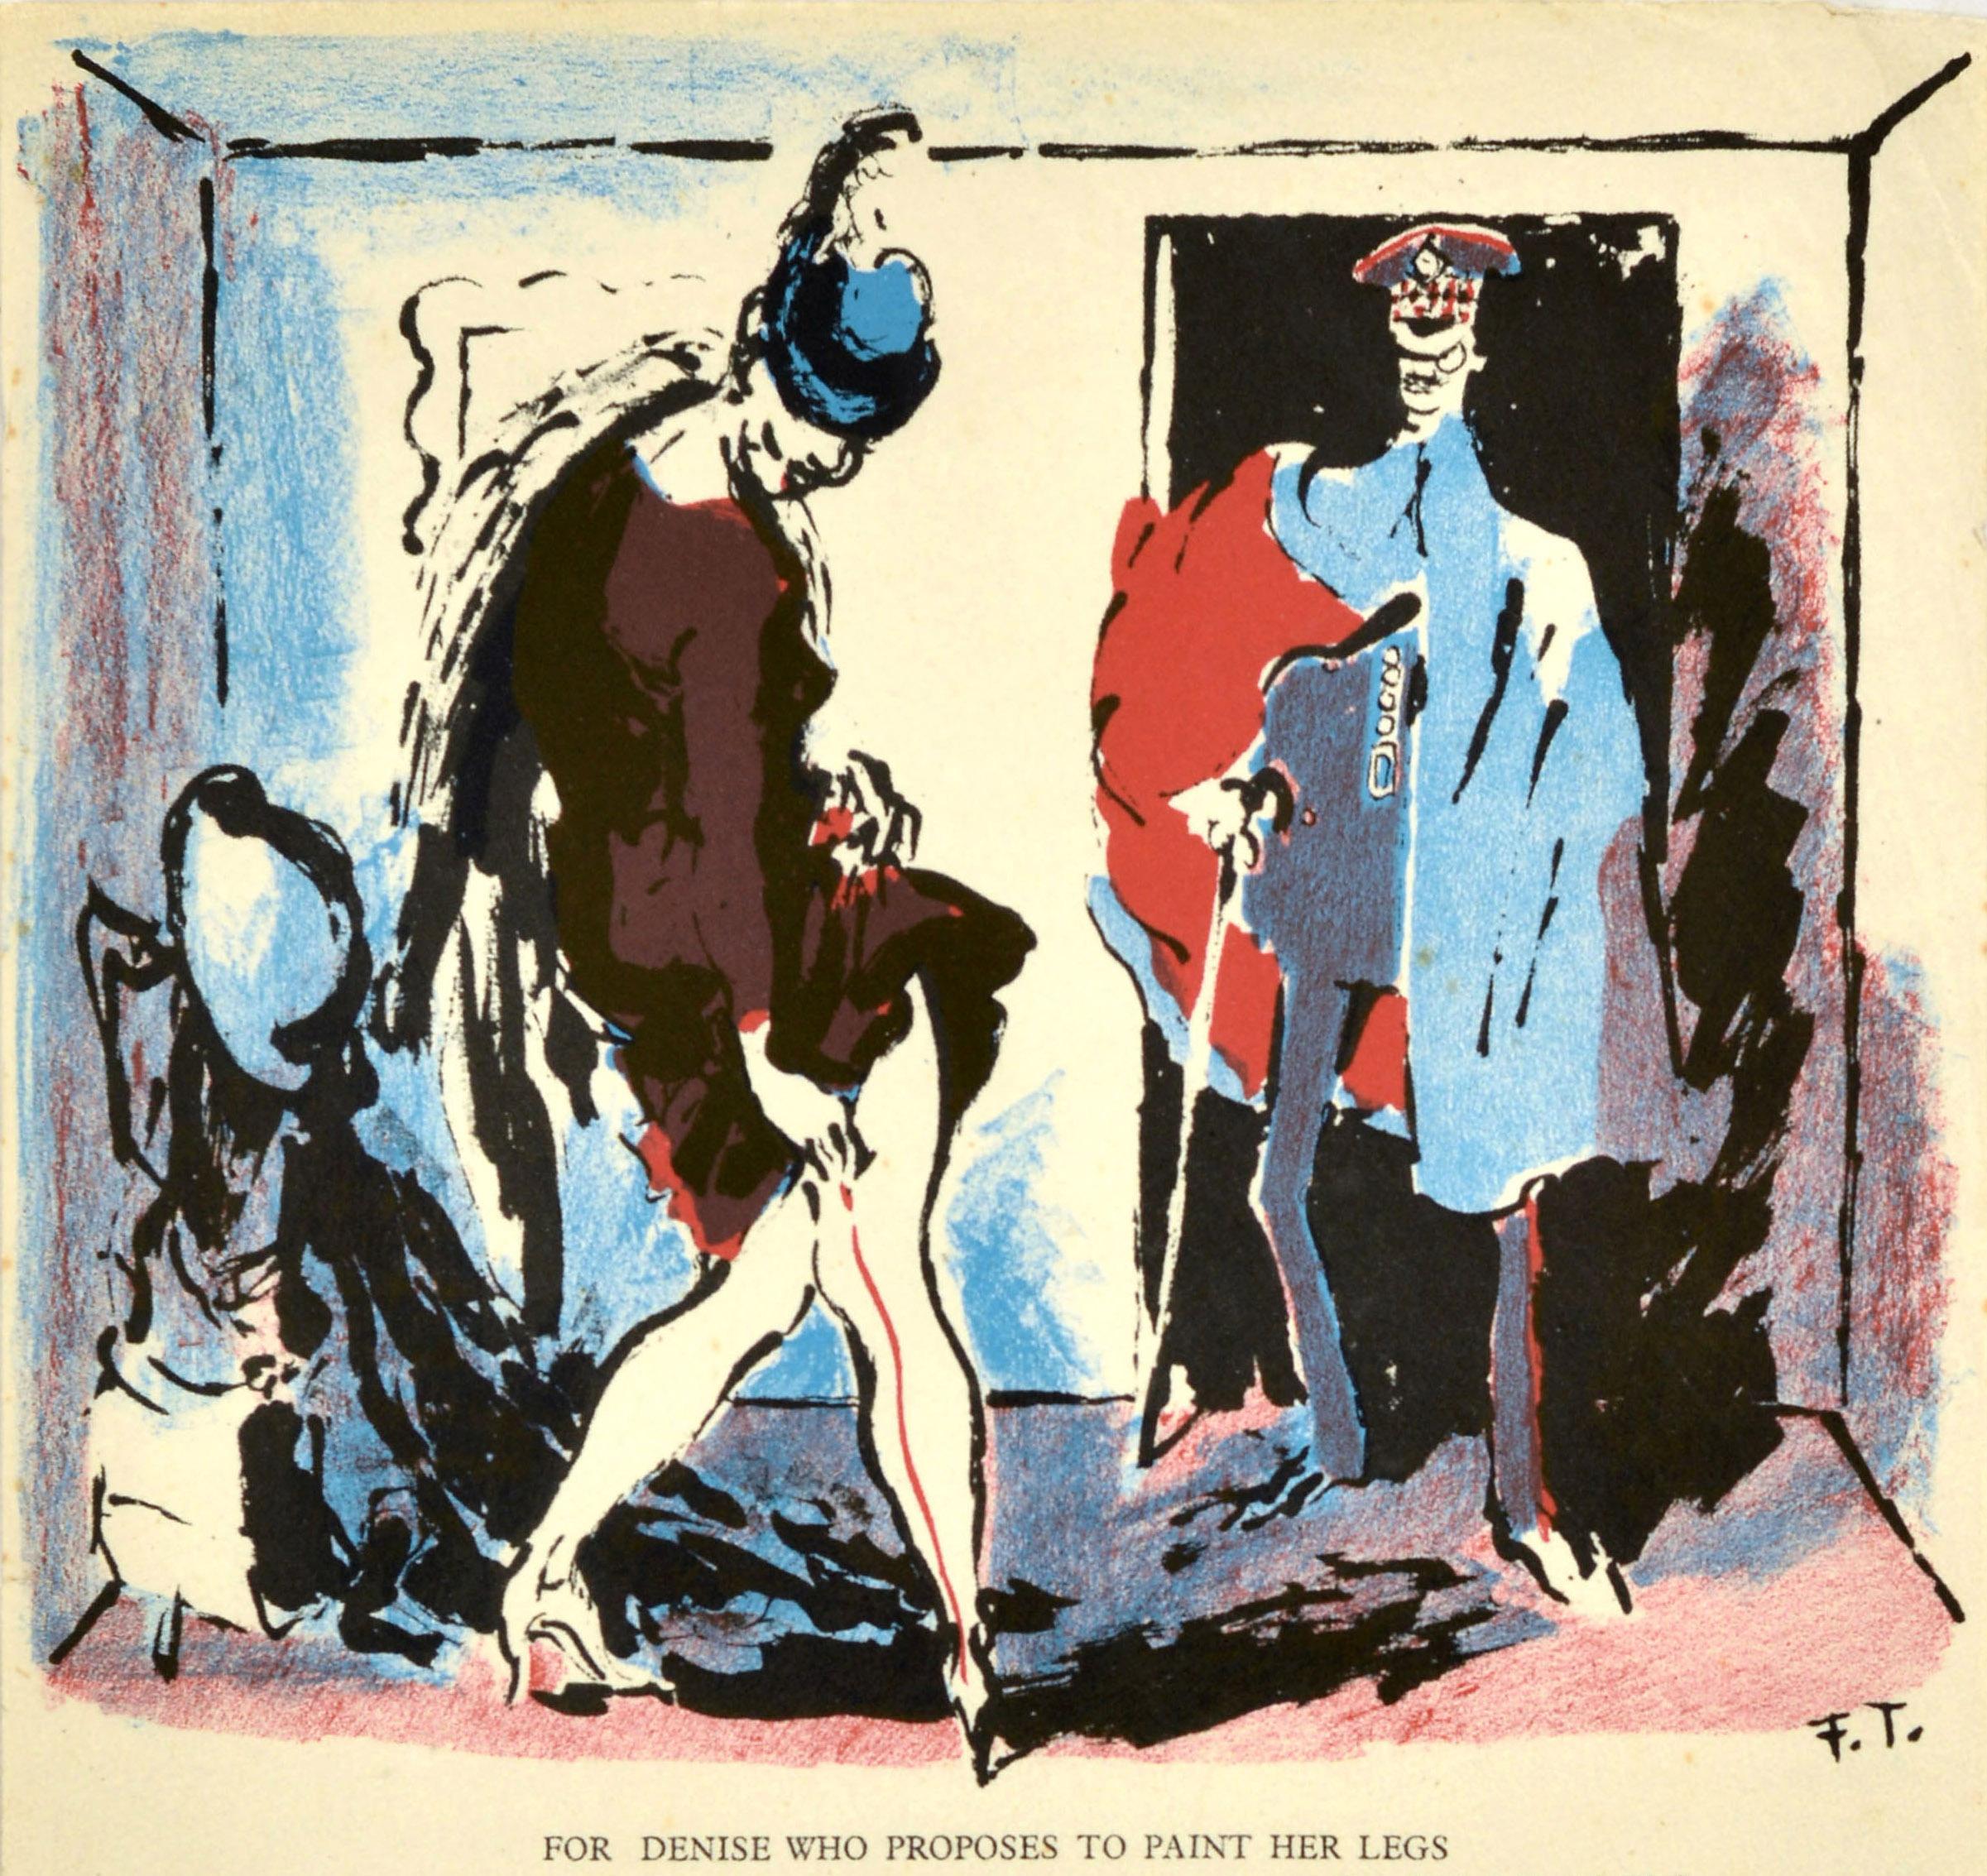 Original Vintage War Poster For Denise Who Proposes To Paint Her Legs Poem WWII - Print by Feliks Topolski